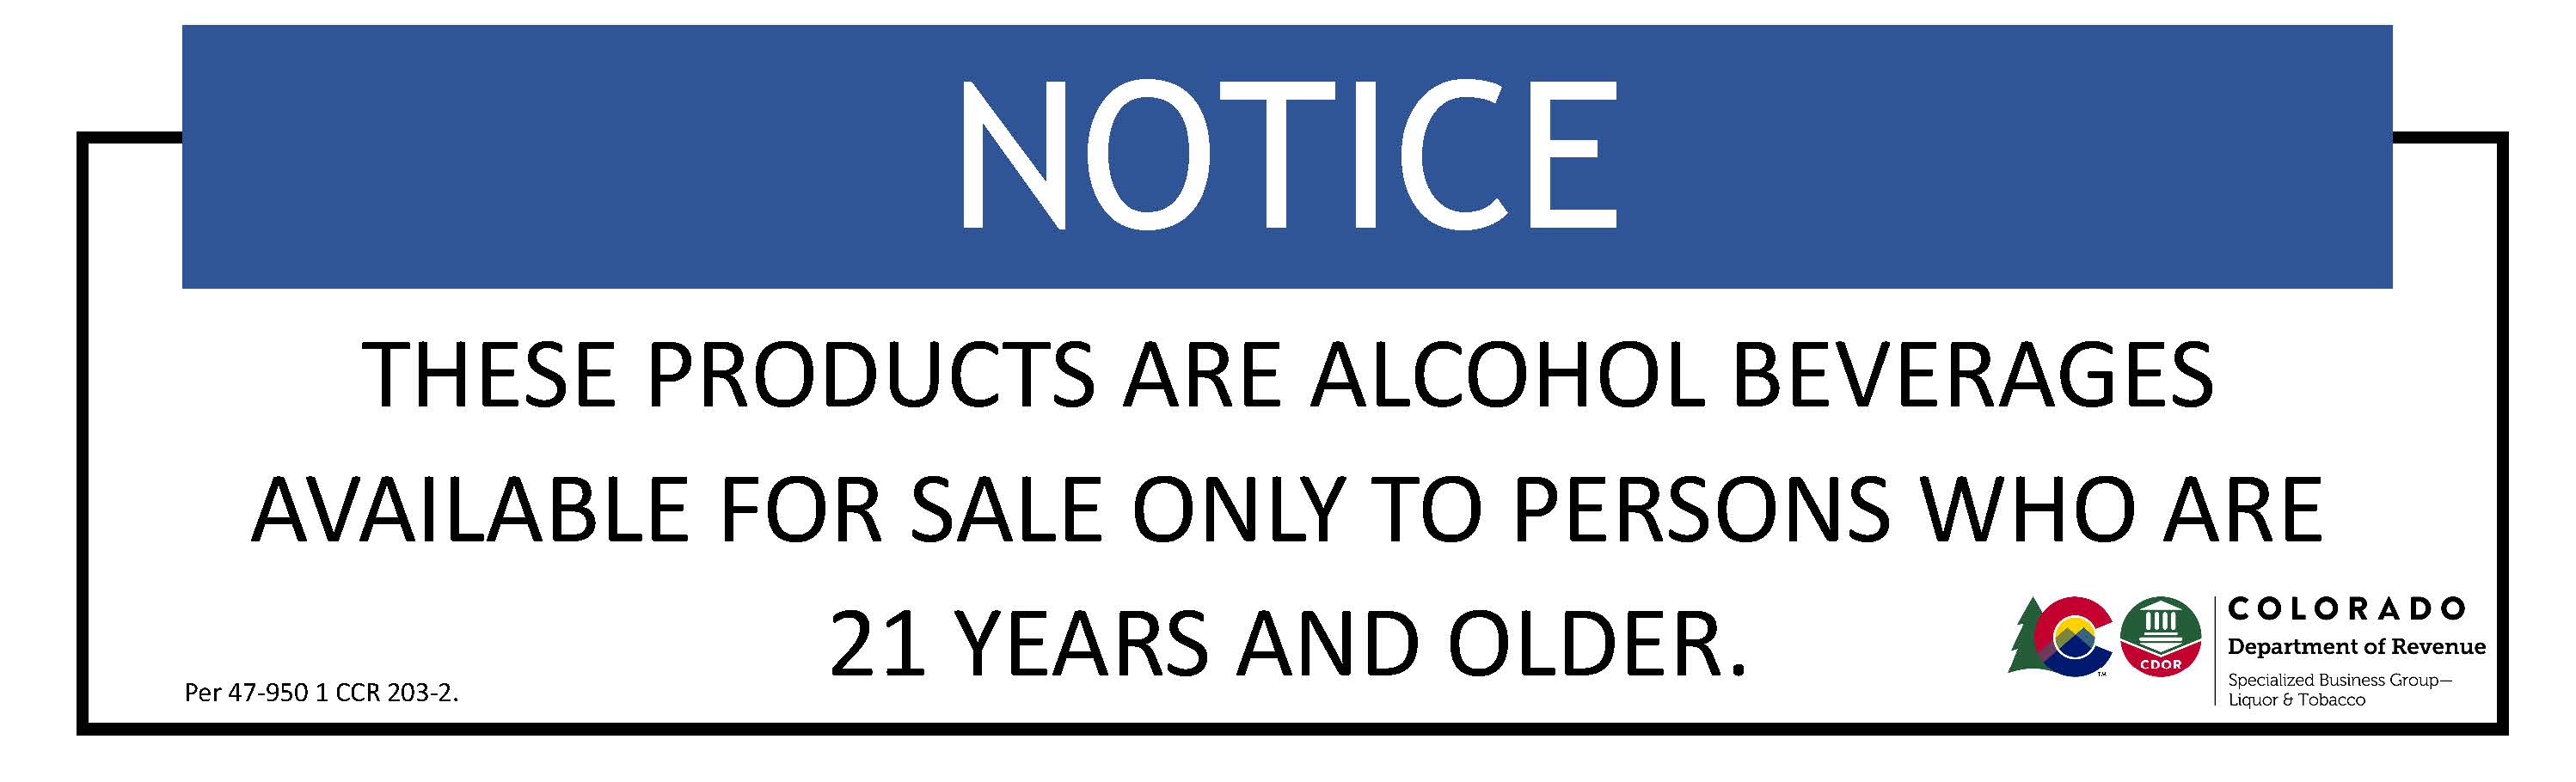 Notice Banner Landscape - These products are alcohol beverages available for sale only to persons who are 21 years of age and older.